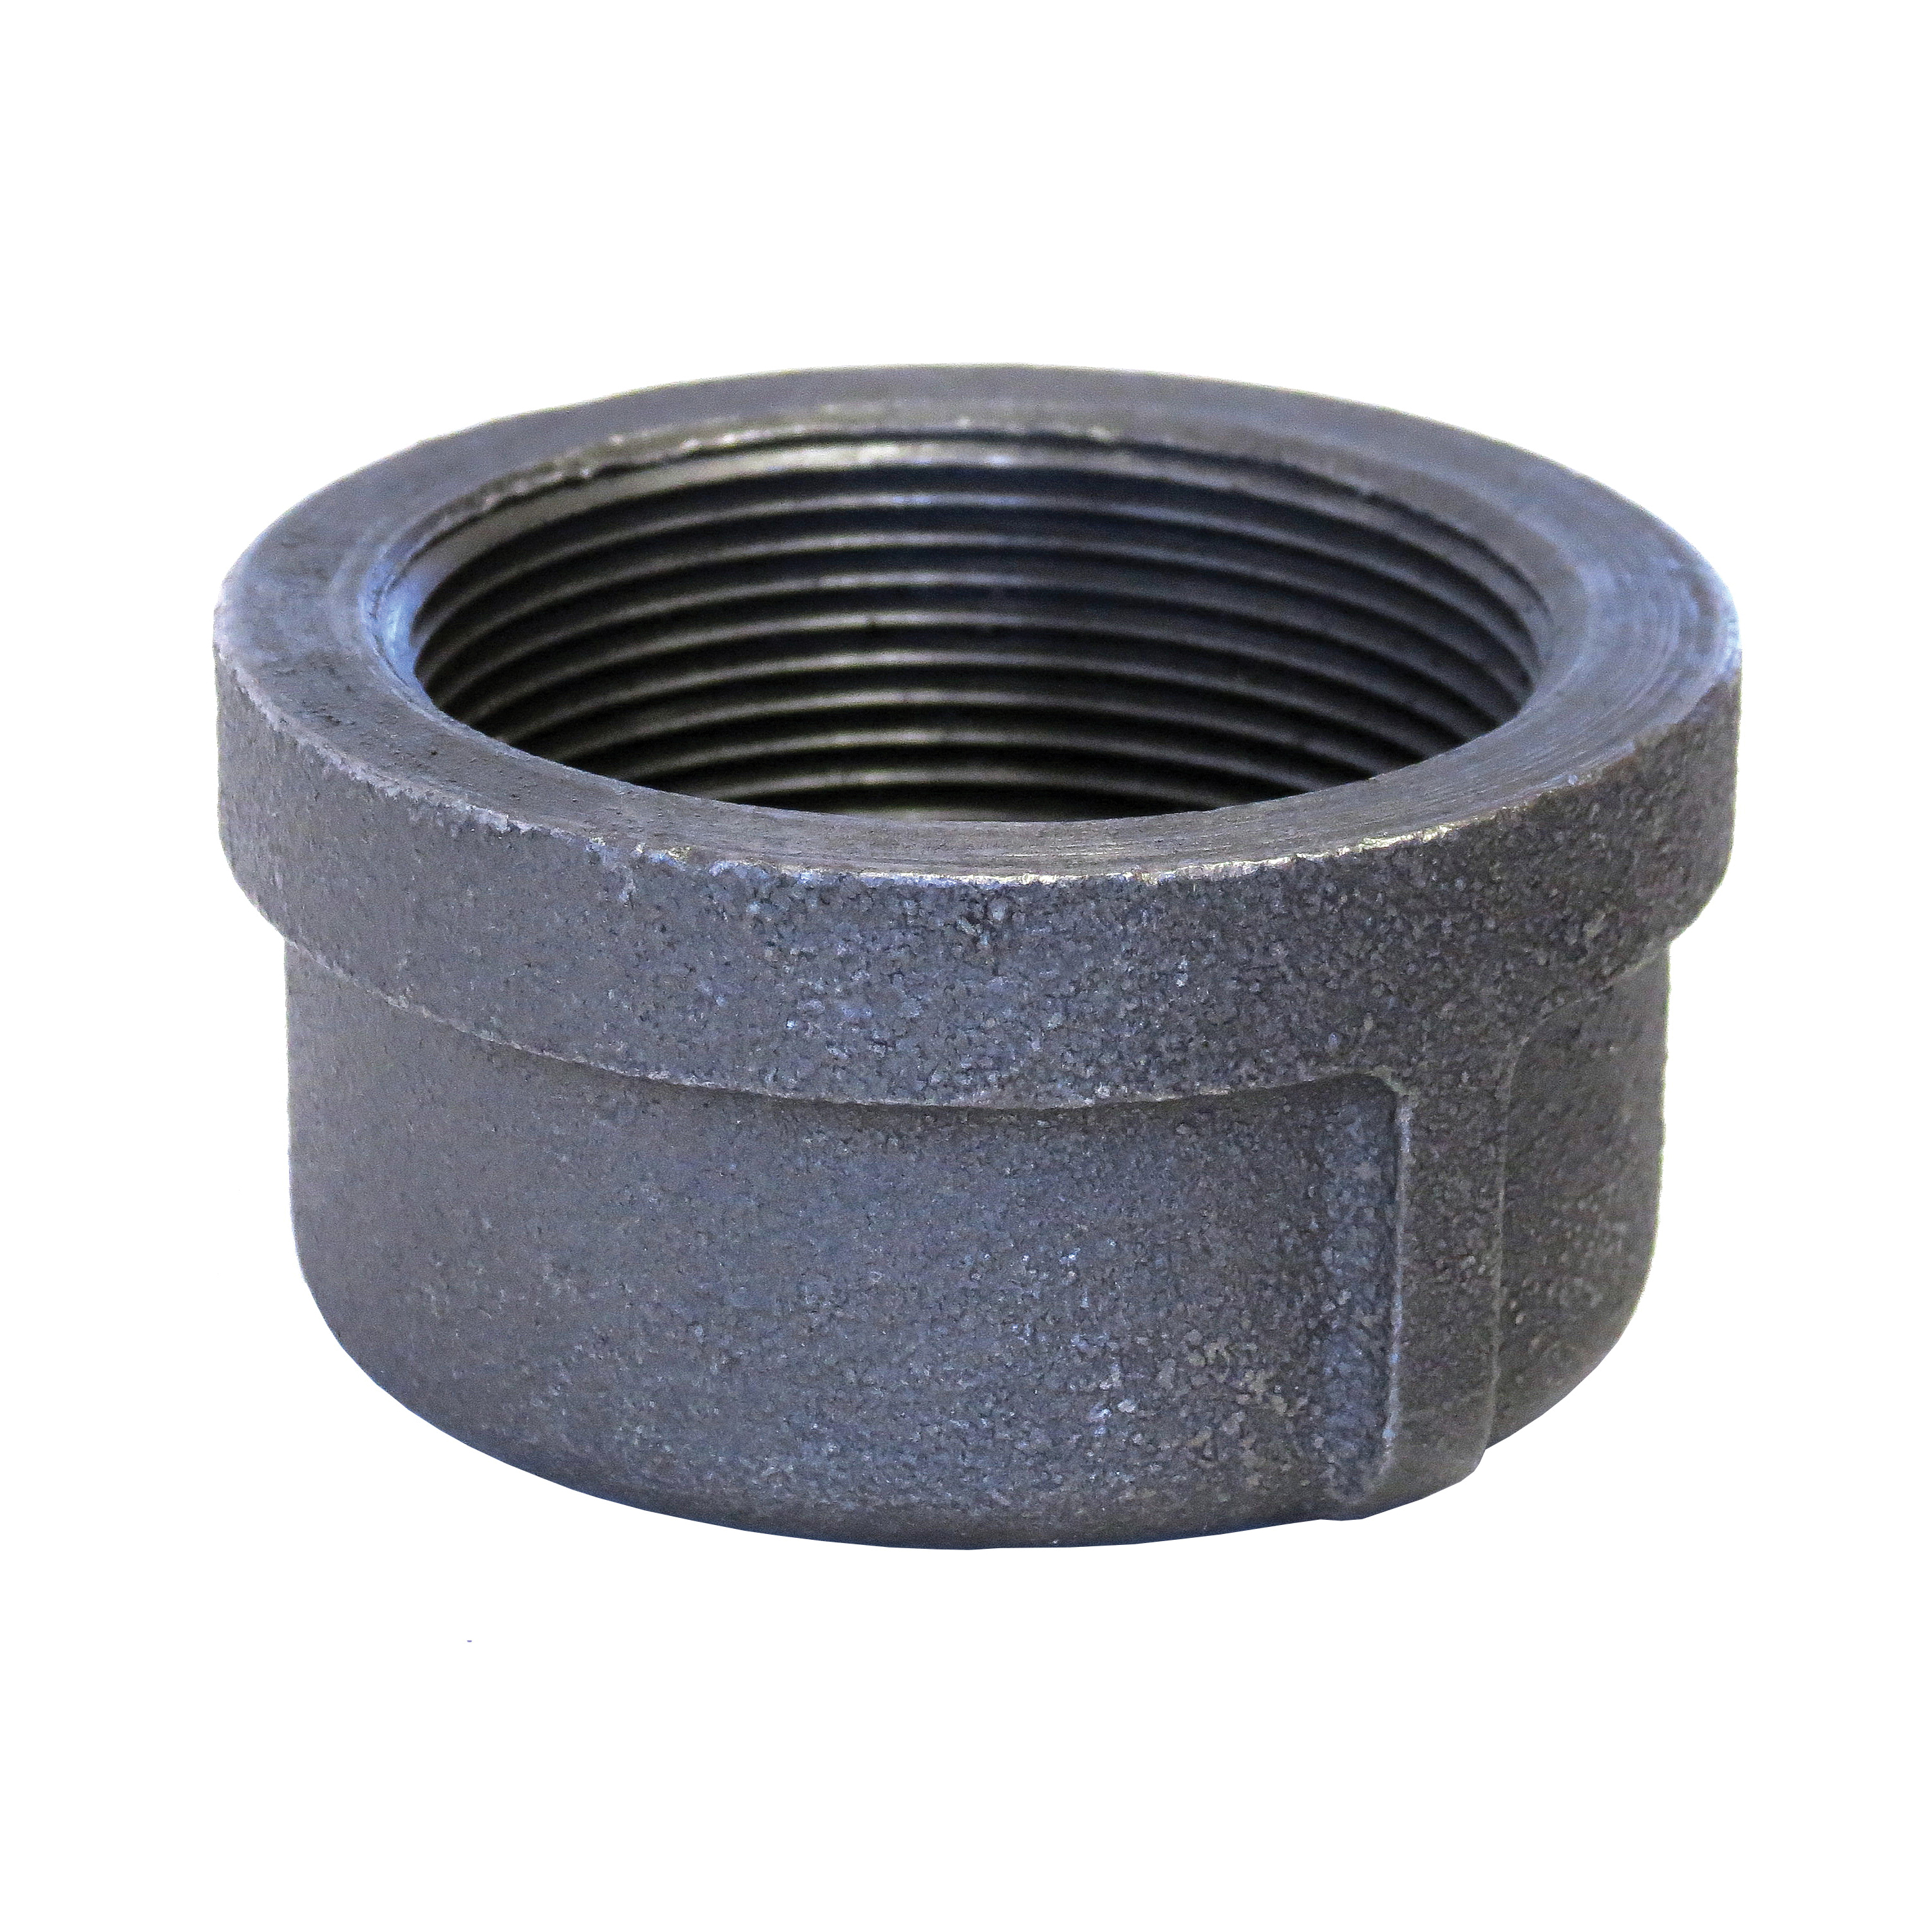 Anvil® 0319901161 FIG 1124 Pipe Cap, 6 in Nominal, FNPT End Style, 150 lb, Malleable Iron, Galvanized, Domestic